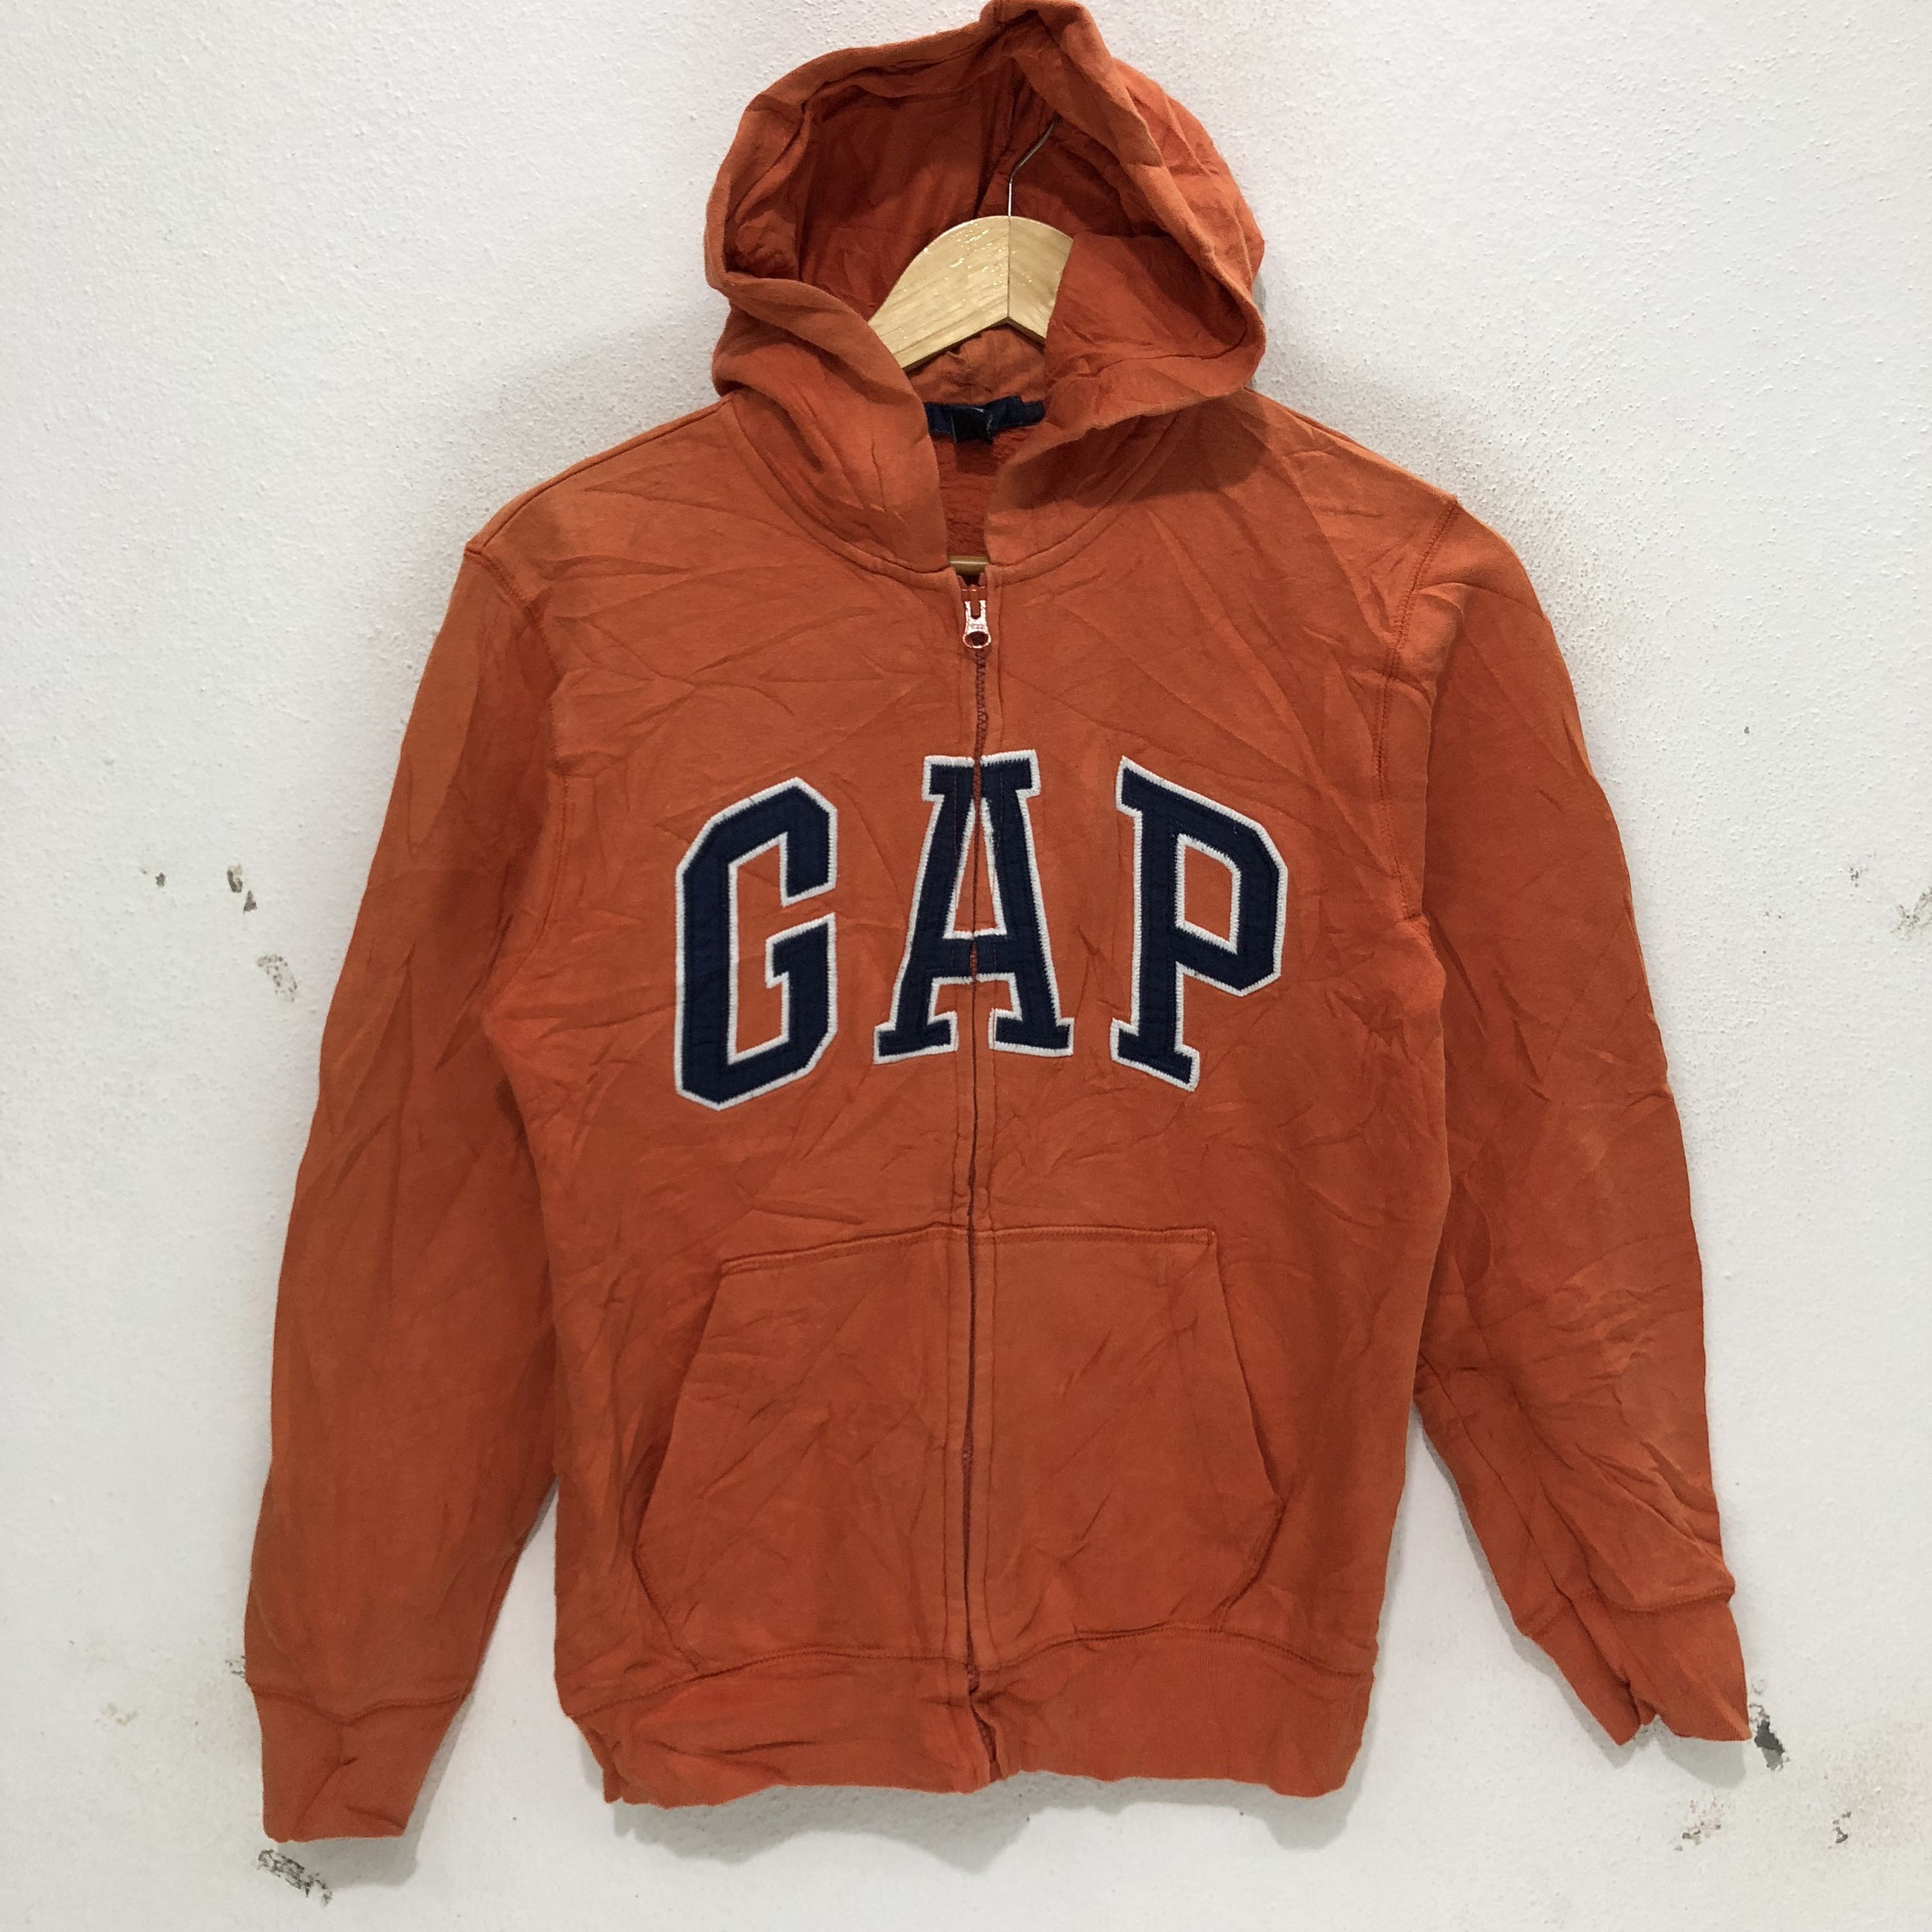 Gap Gap Zip Up Hoodie Sweater Spell Out Orange Sweatshirt Size Large Size US L / EU 52-54 / 3 - 1 Preview